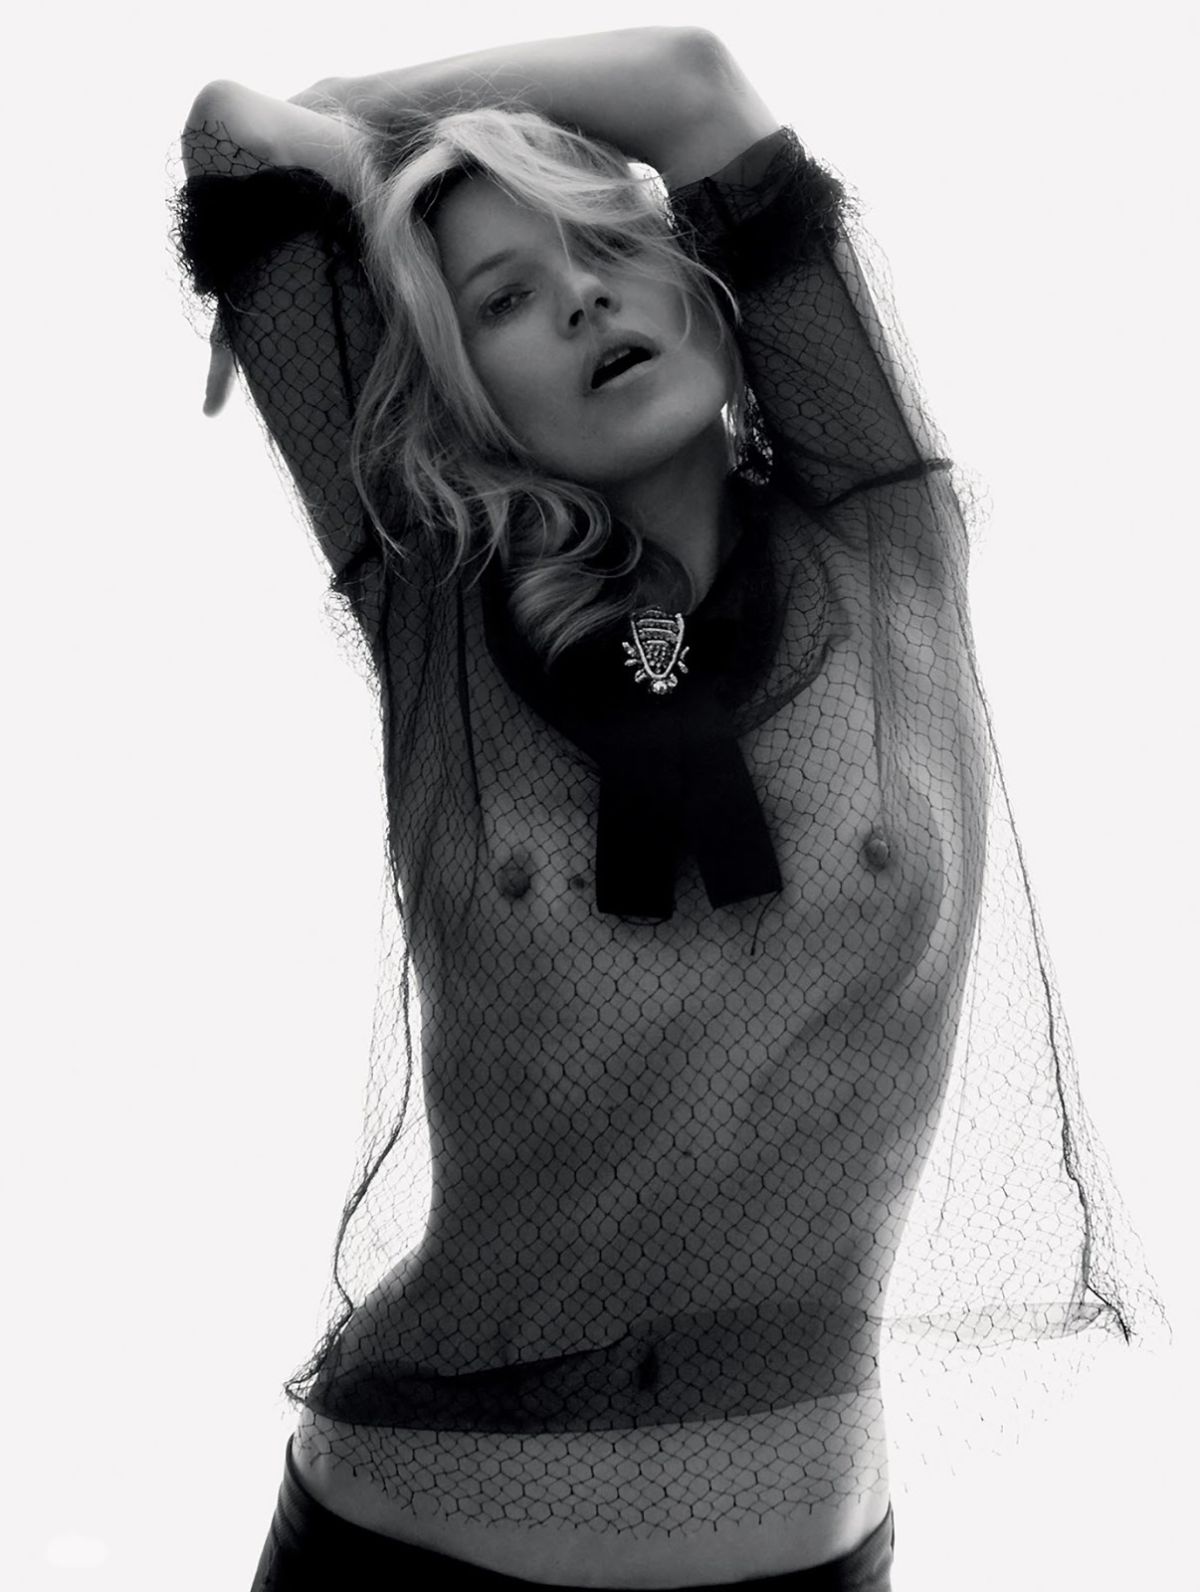 Kate Moss by David Sims and Katie Grand for Love Magazine Fall-Winter 2015